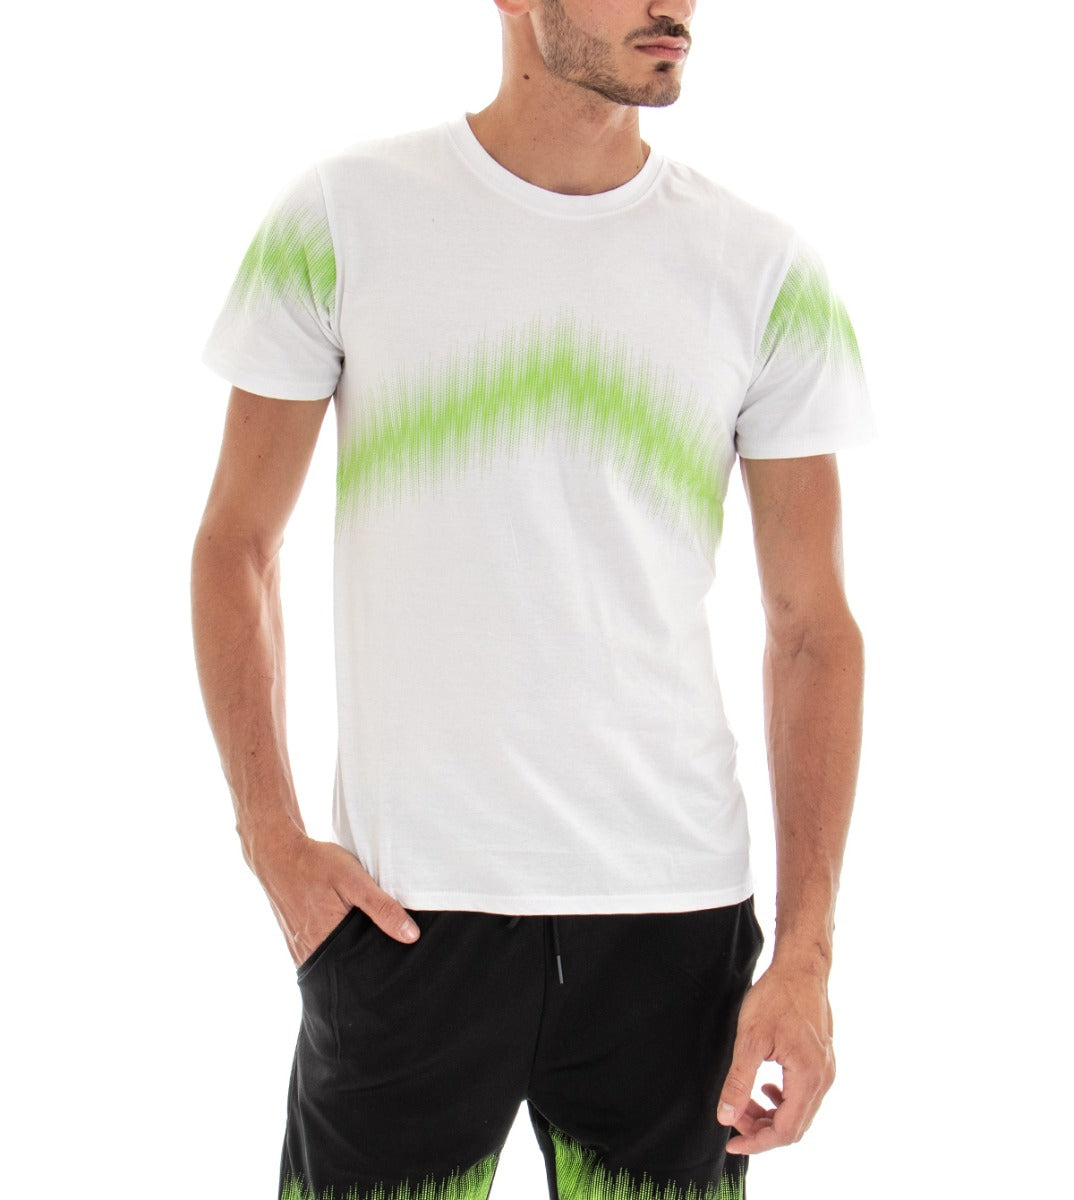 Complete Coordinated Set for Men with White Bermuda T-Shirt GIOSAL-OU1603A